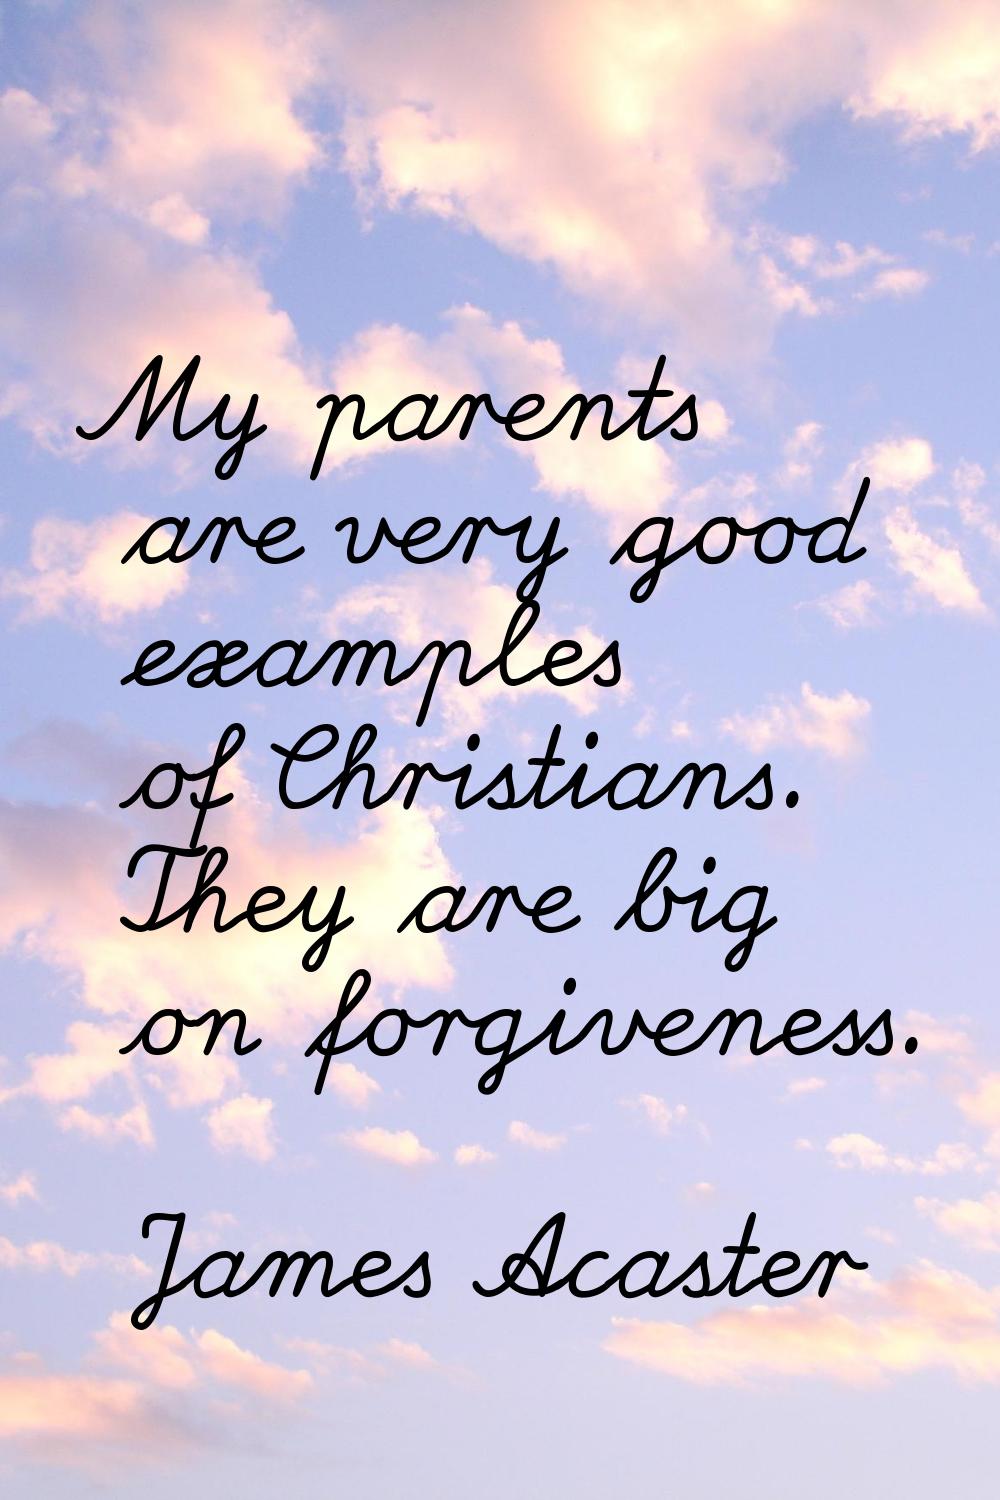 My parents are very good examples of Christians. They are big on forgiveness.